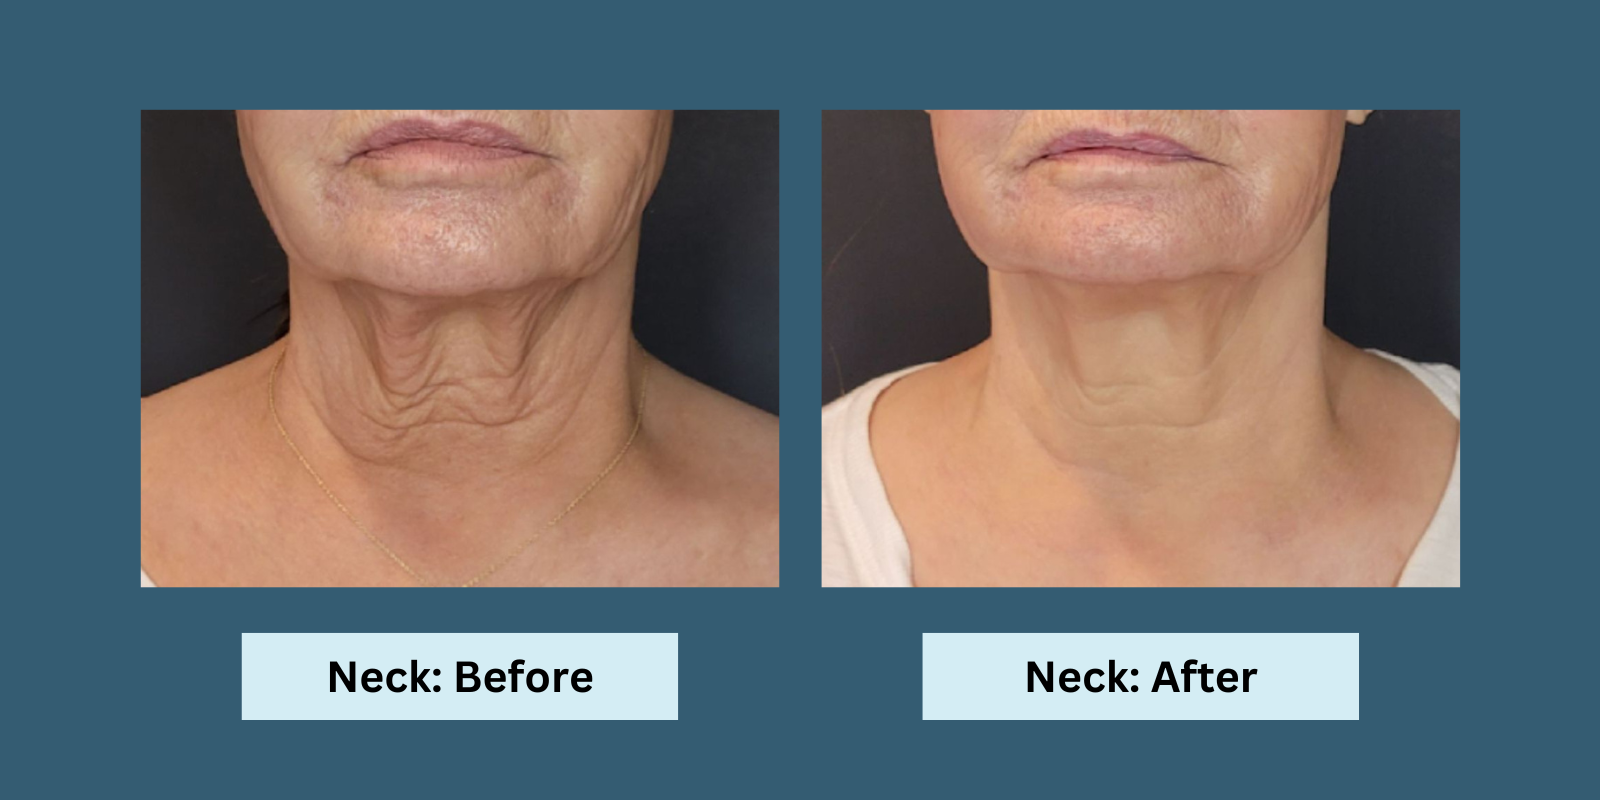 Sofwave treatment for neck: Before and After pictures